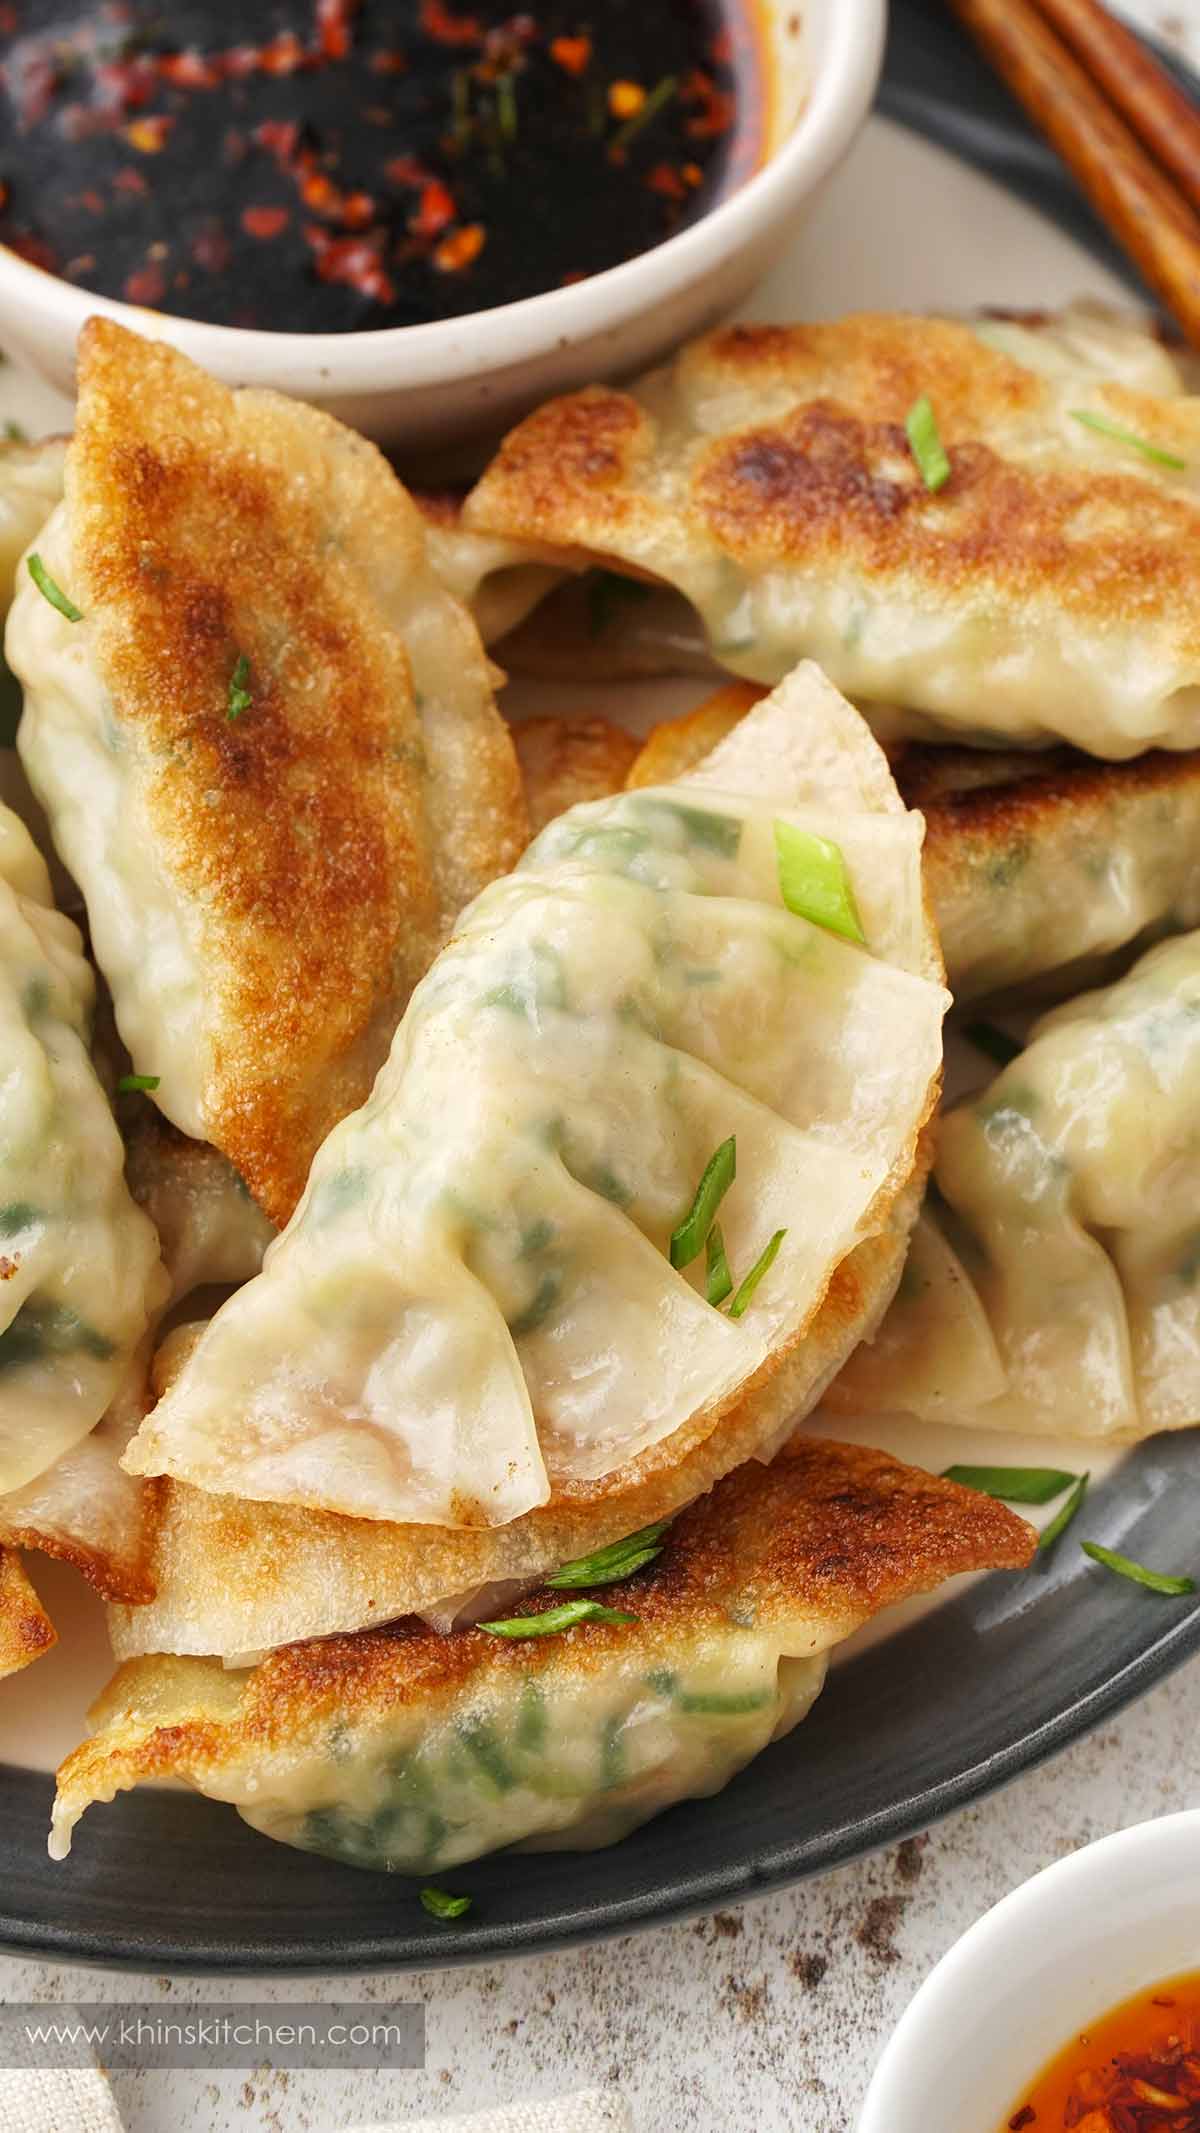 A grey plate containing pan-fried Japanese prawn gyoza dumplings with chives and dipping sauce.  